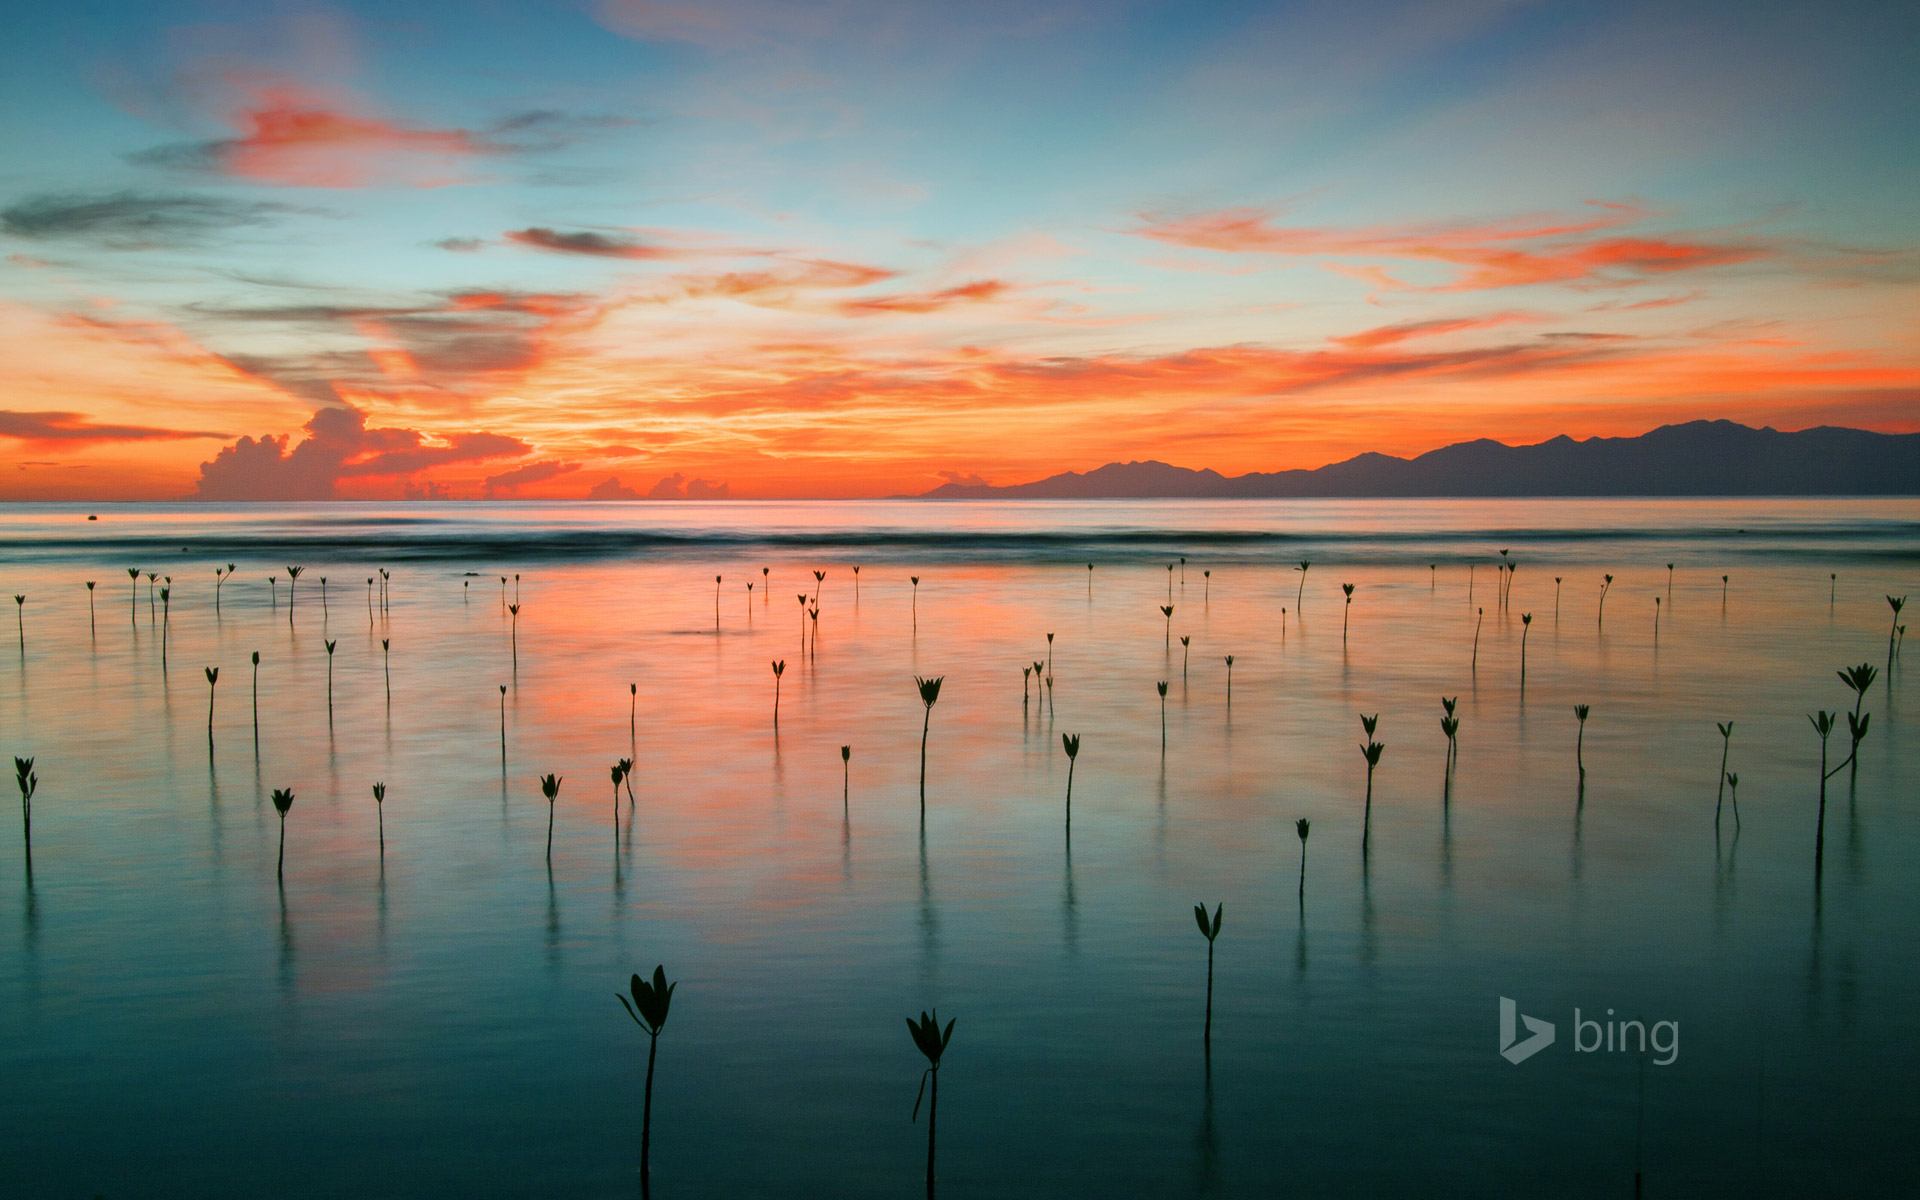 Bing’s Homepage Gallery Offers The Most Beautiful Wallpapers Imaginable